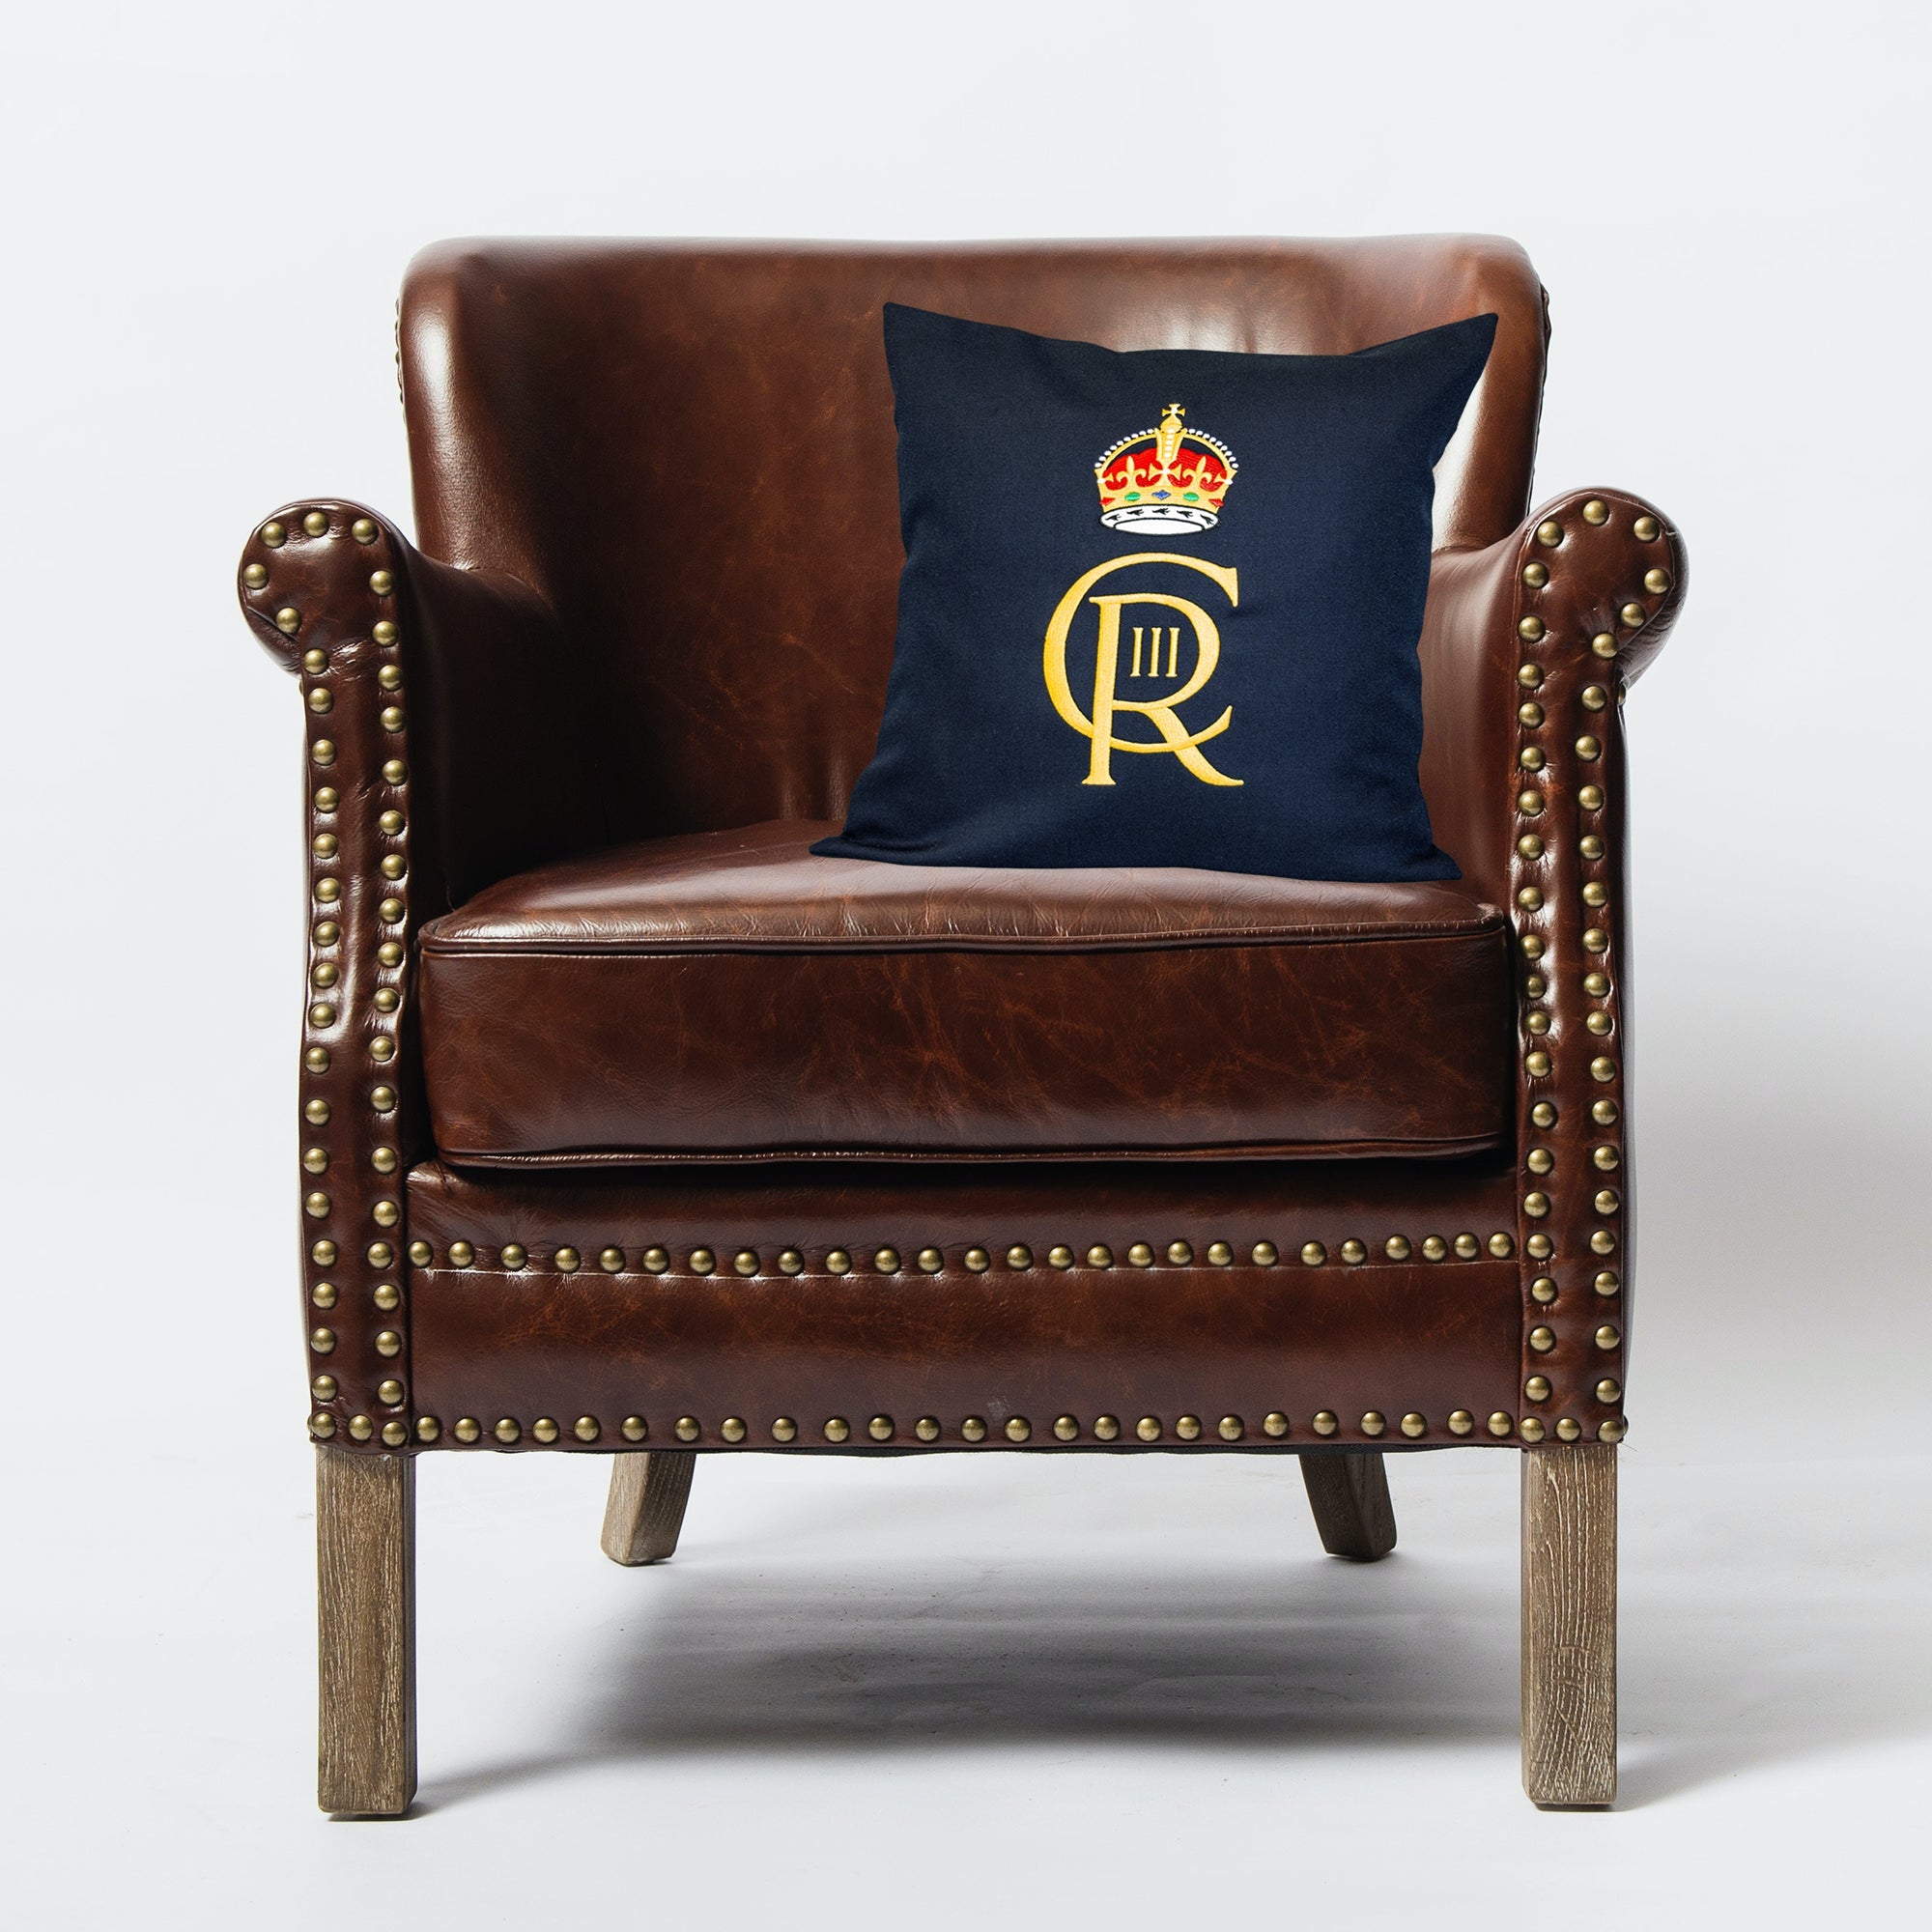 CIIIR Cypher (King's Crown) Hand Embroidered Cushion Cover